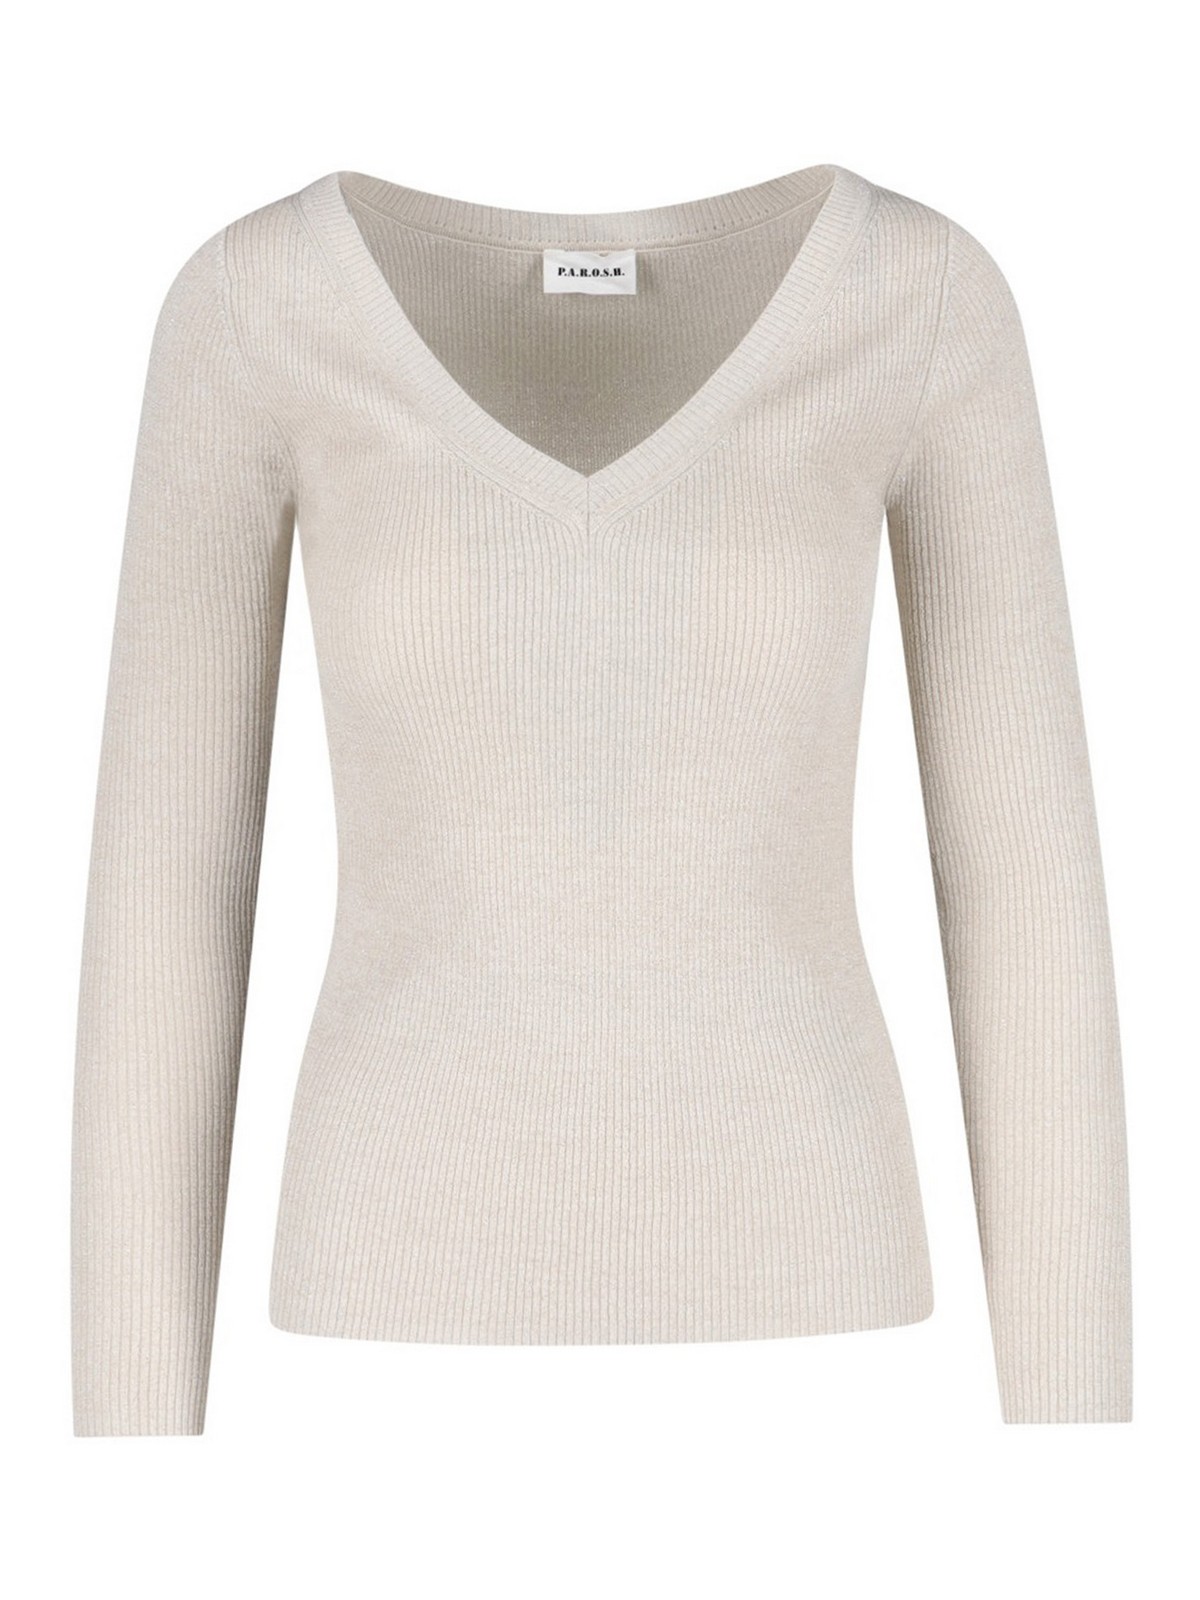 P.a.r.o.s.h Ribbed Sweater In White